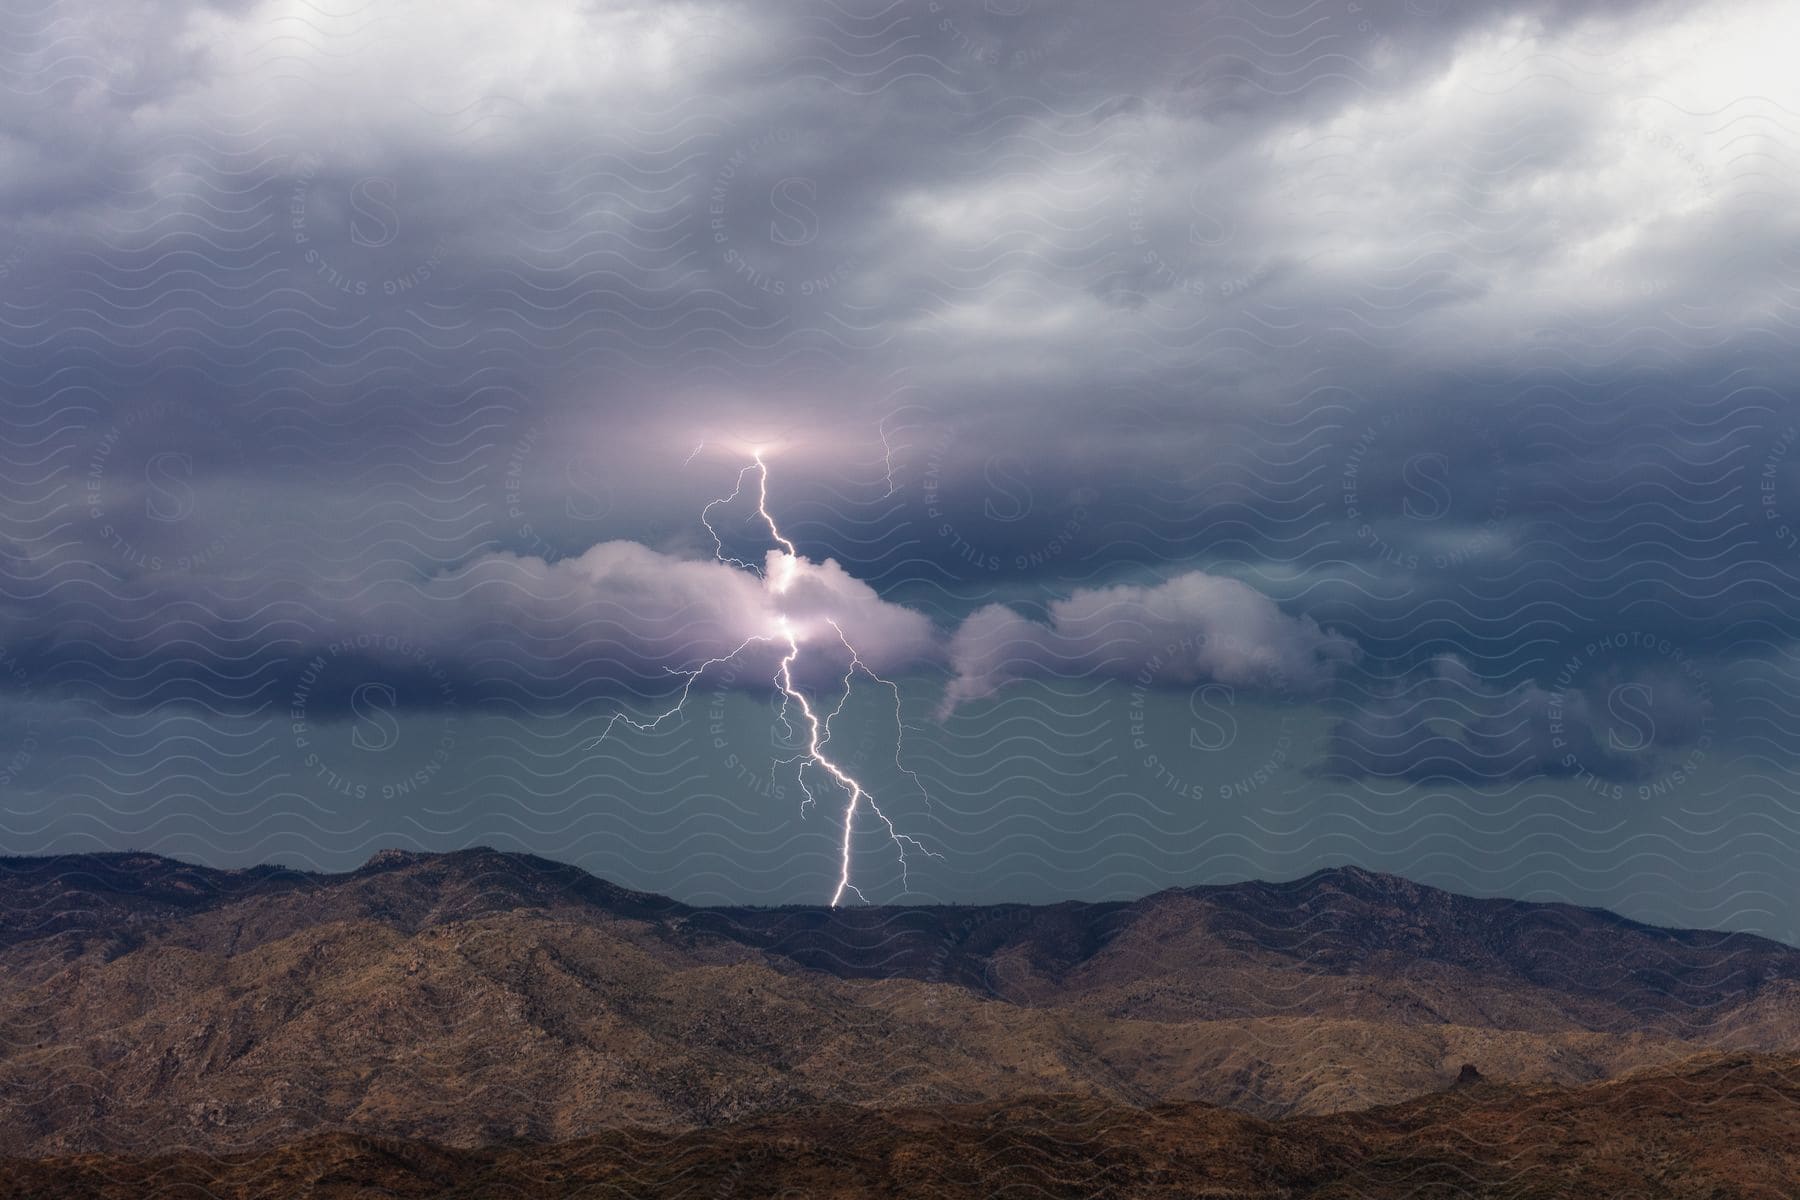 Bolts of lightning flash over barren mountains in this landscape